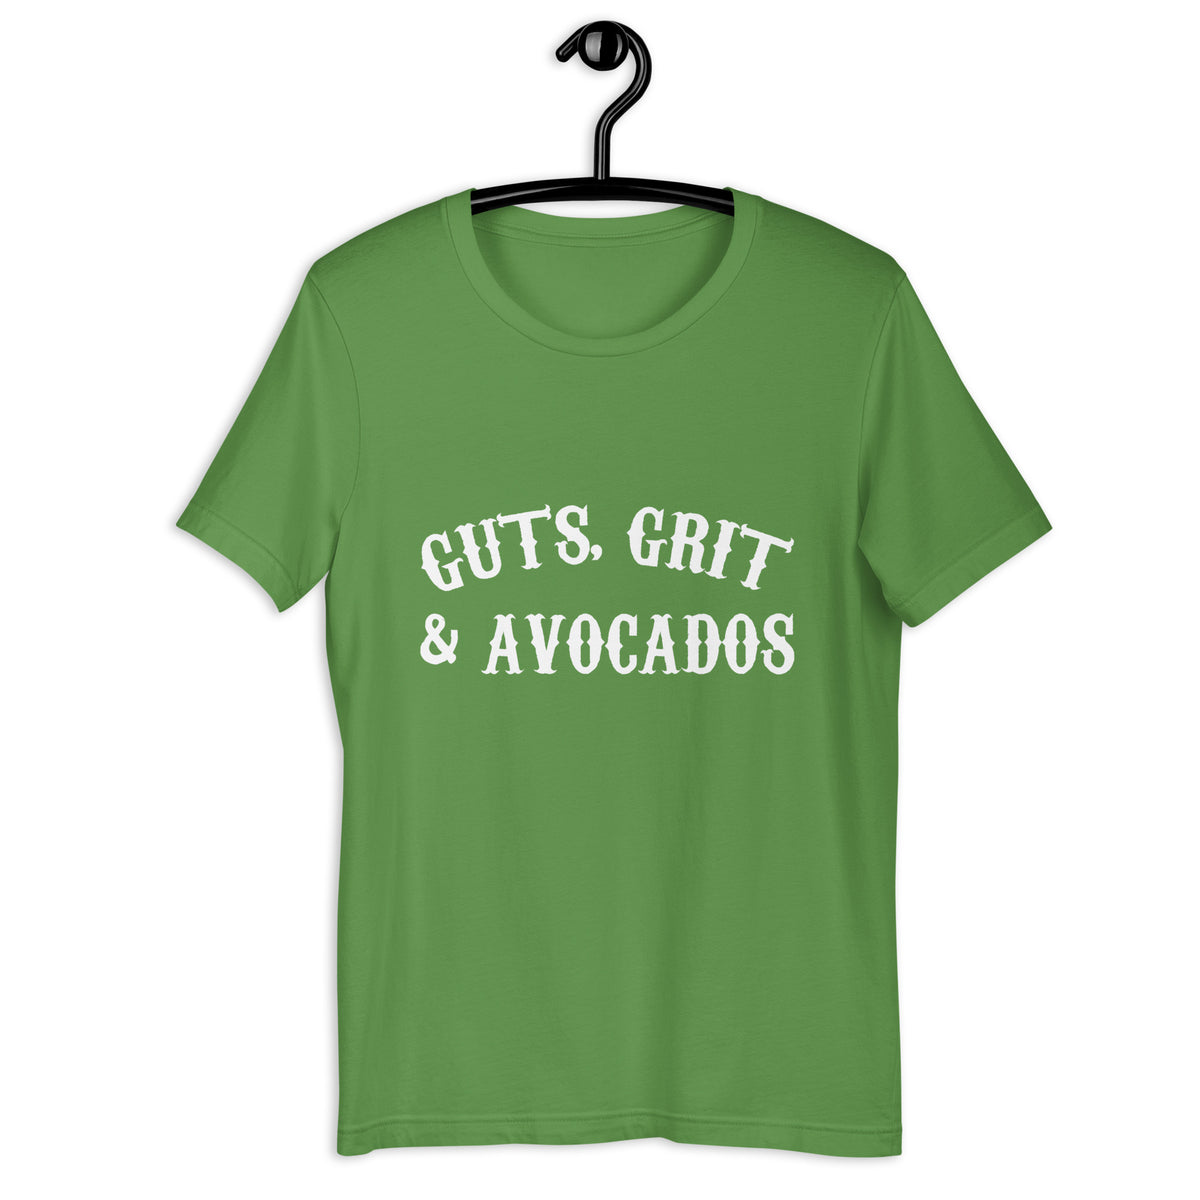 GUTS GRIT AND AVOCADOS Colored t-shirt